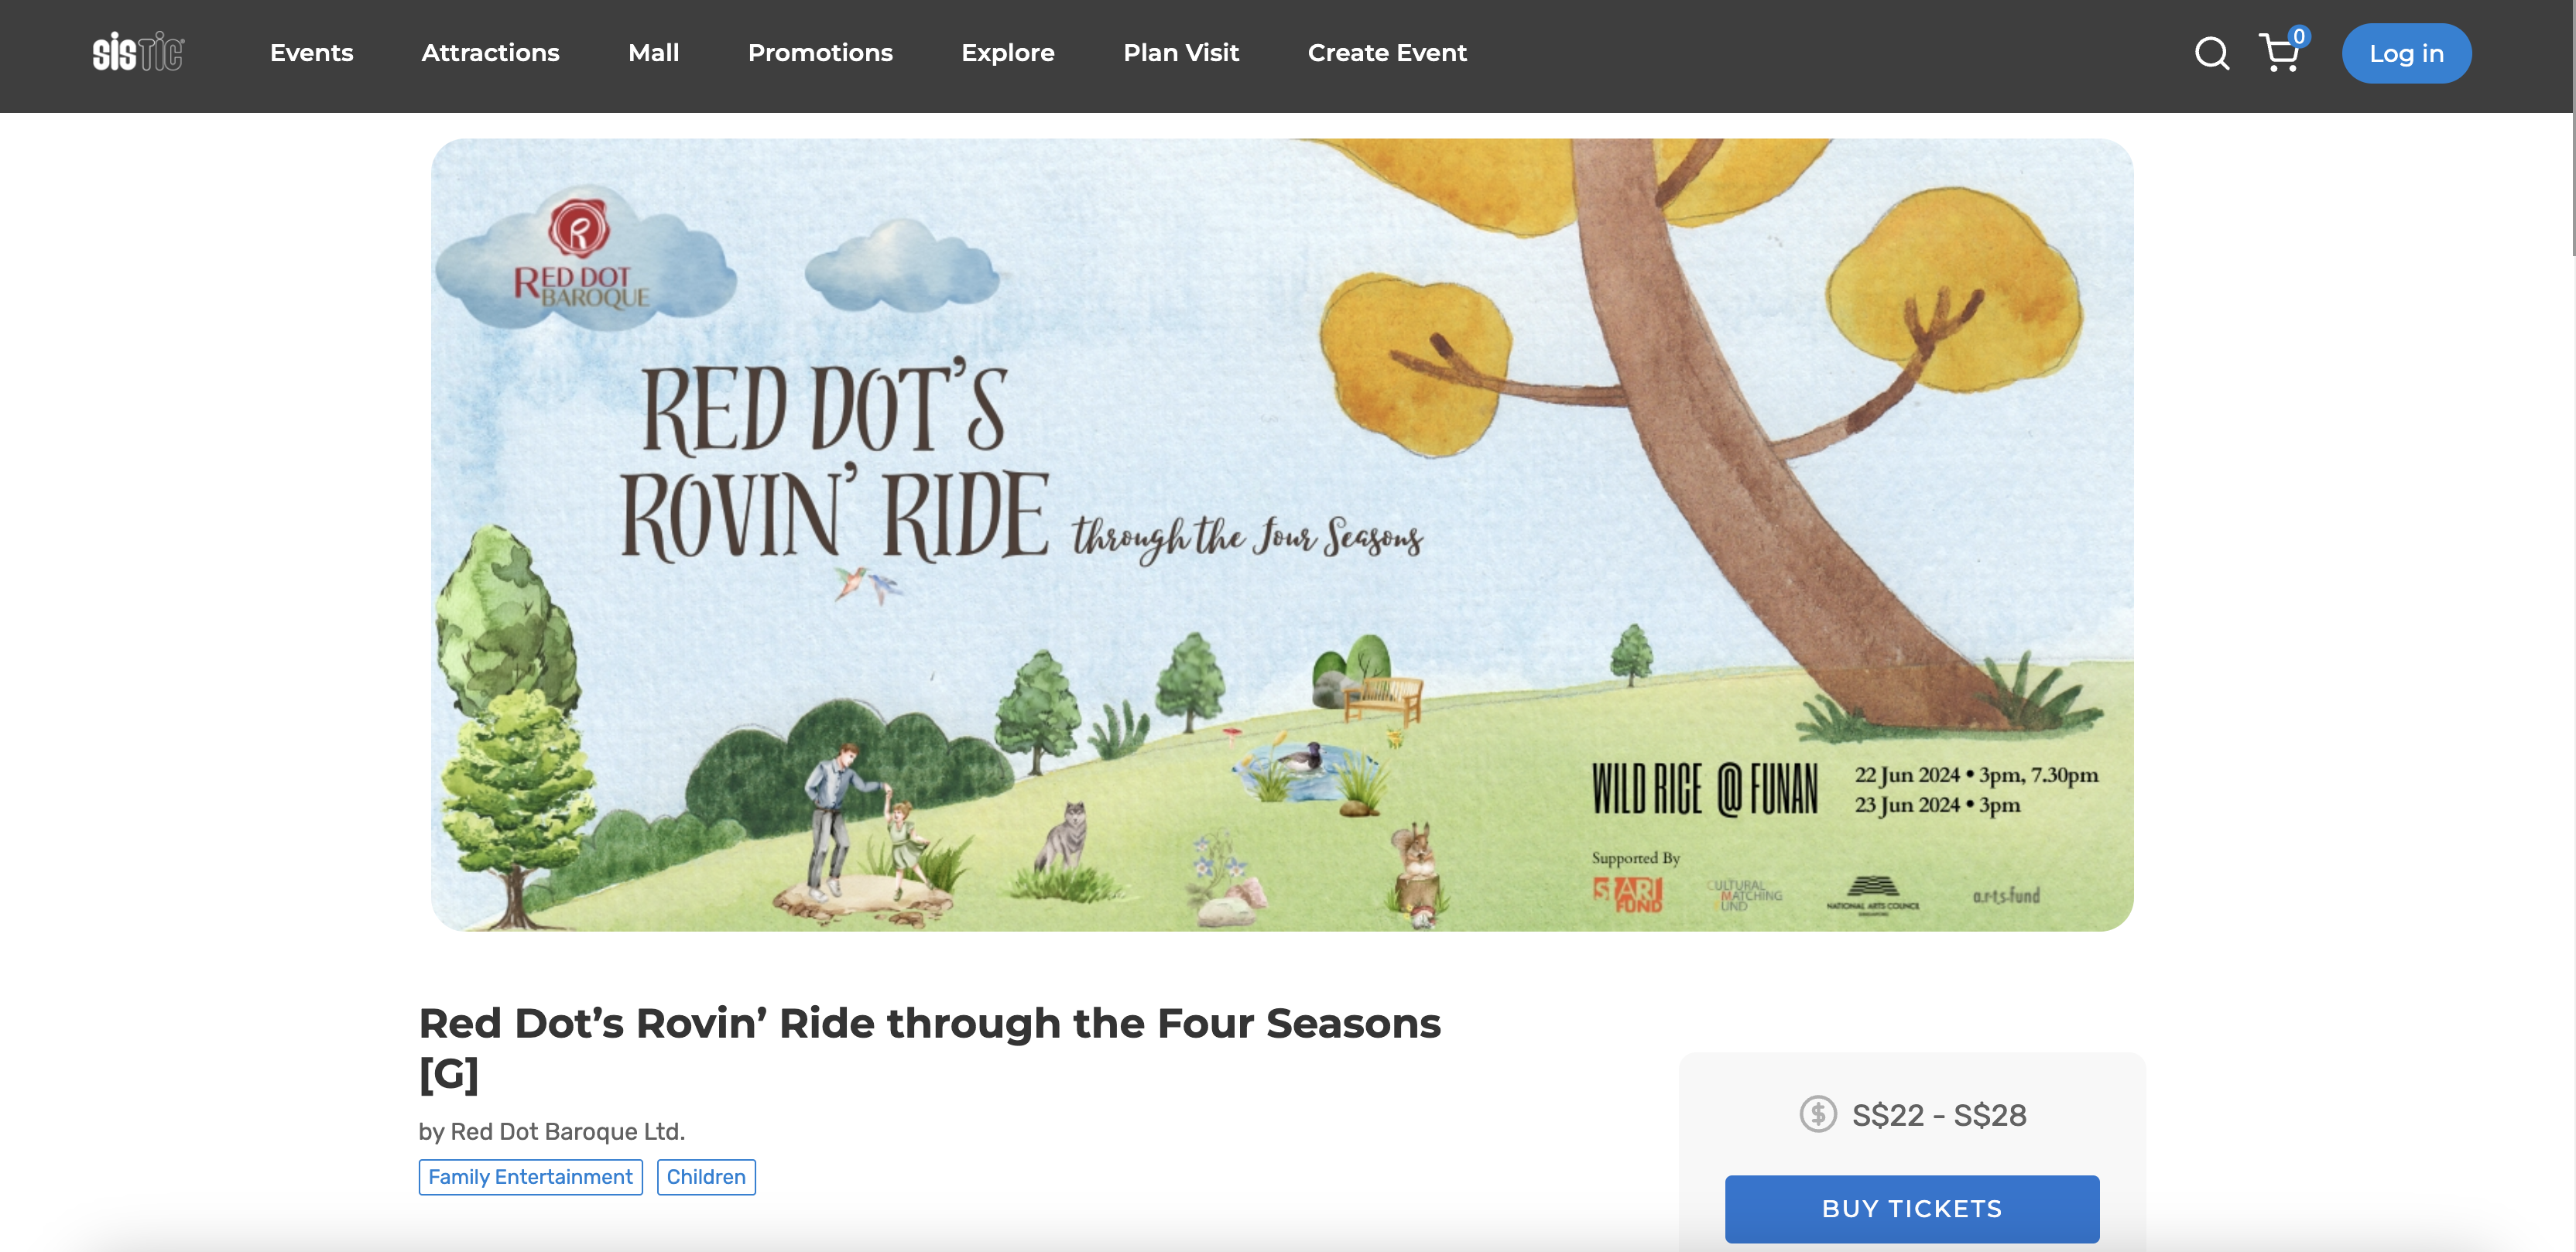 Red Dot’s Rovin’ Ride through the Four Seasons